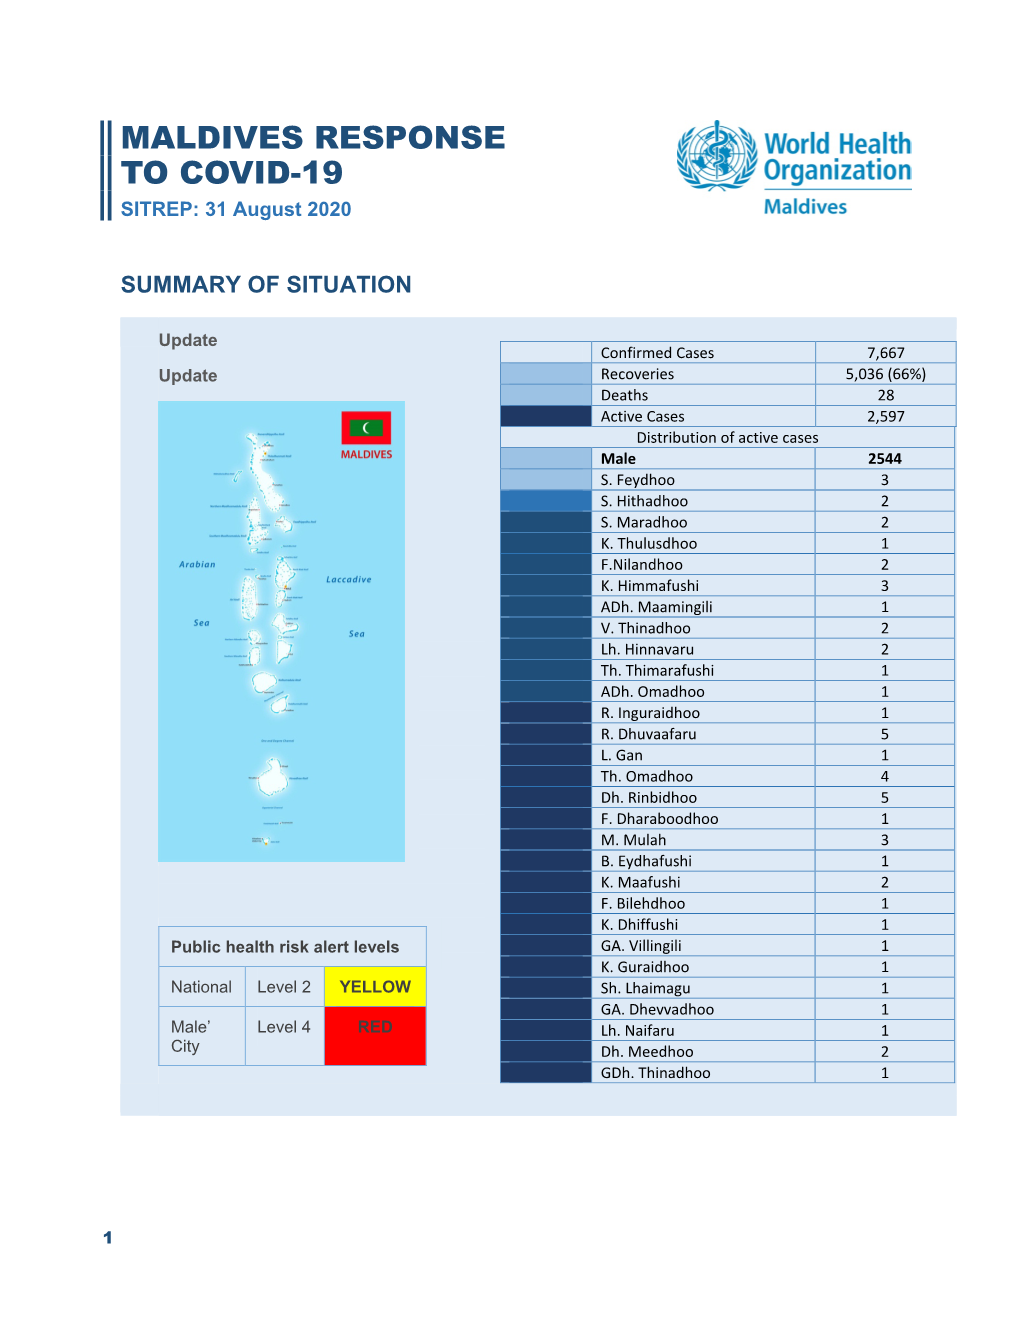 MALDIVES RESPONSE to COVID-19 SITREP: 31 August 2020